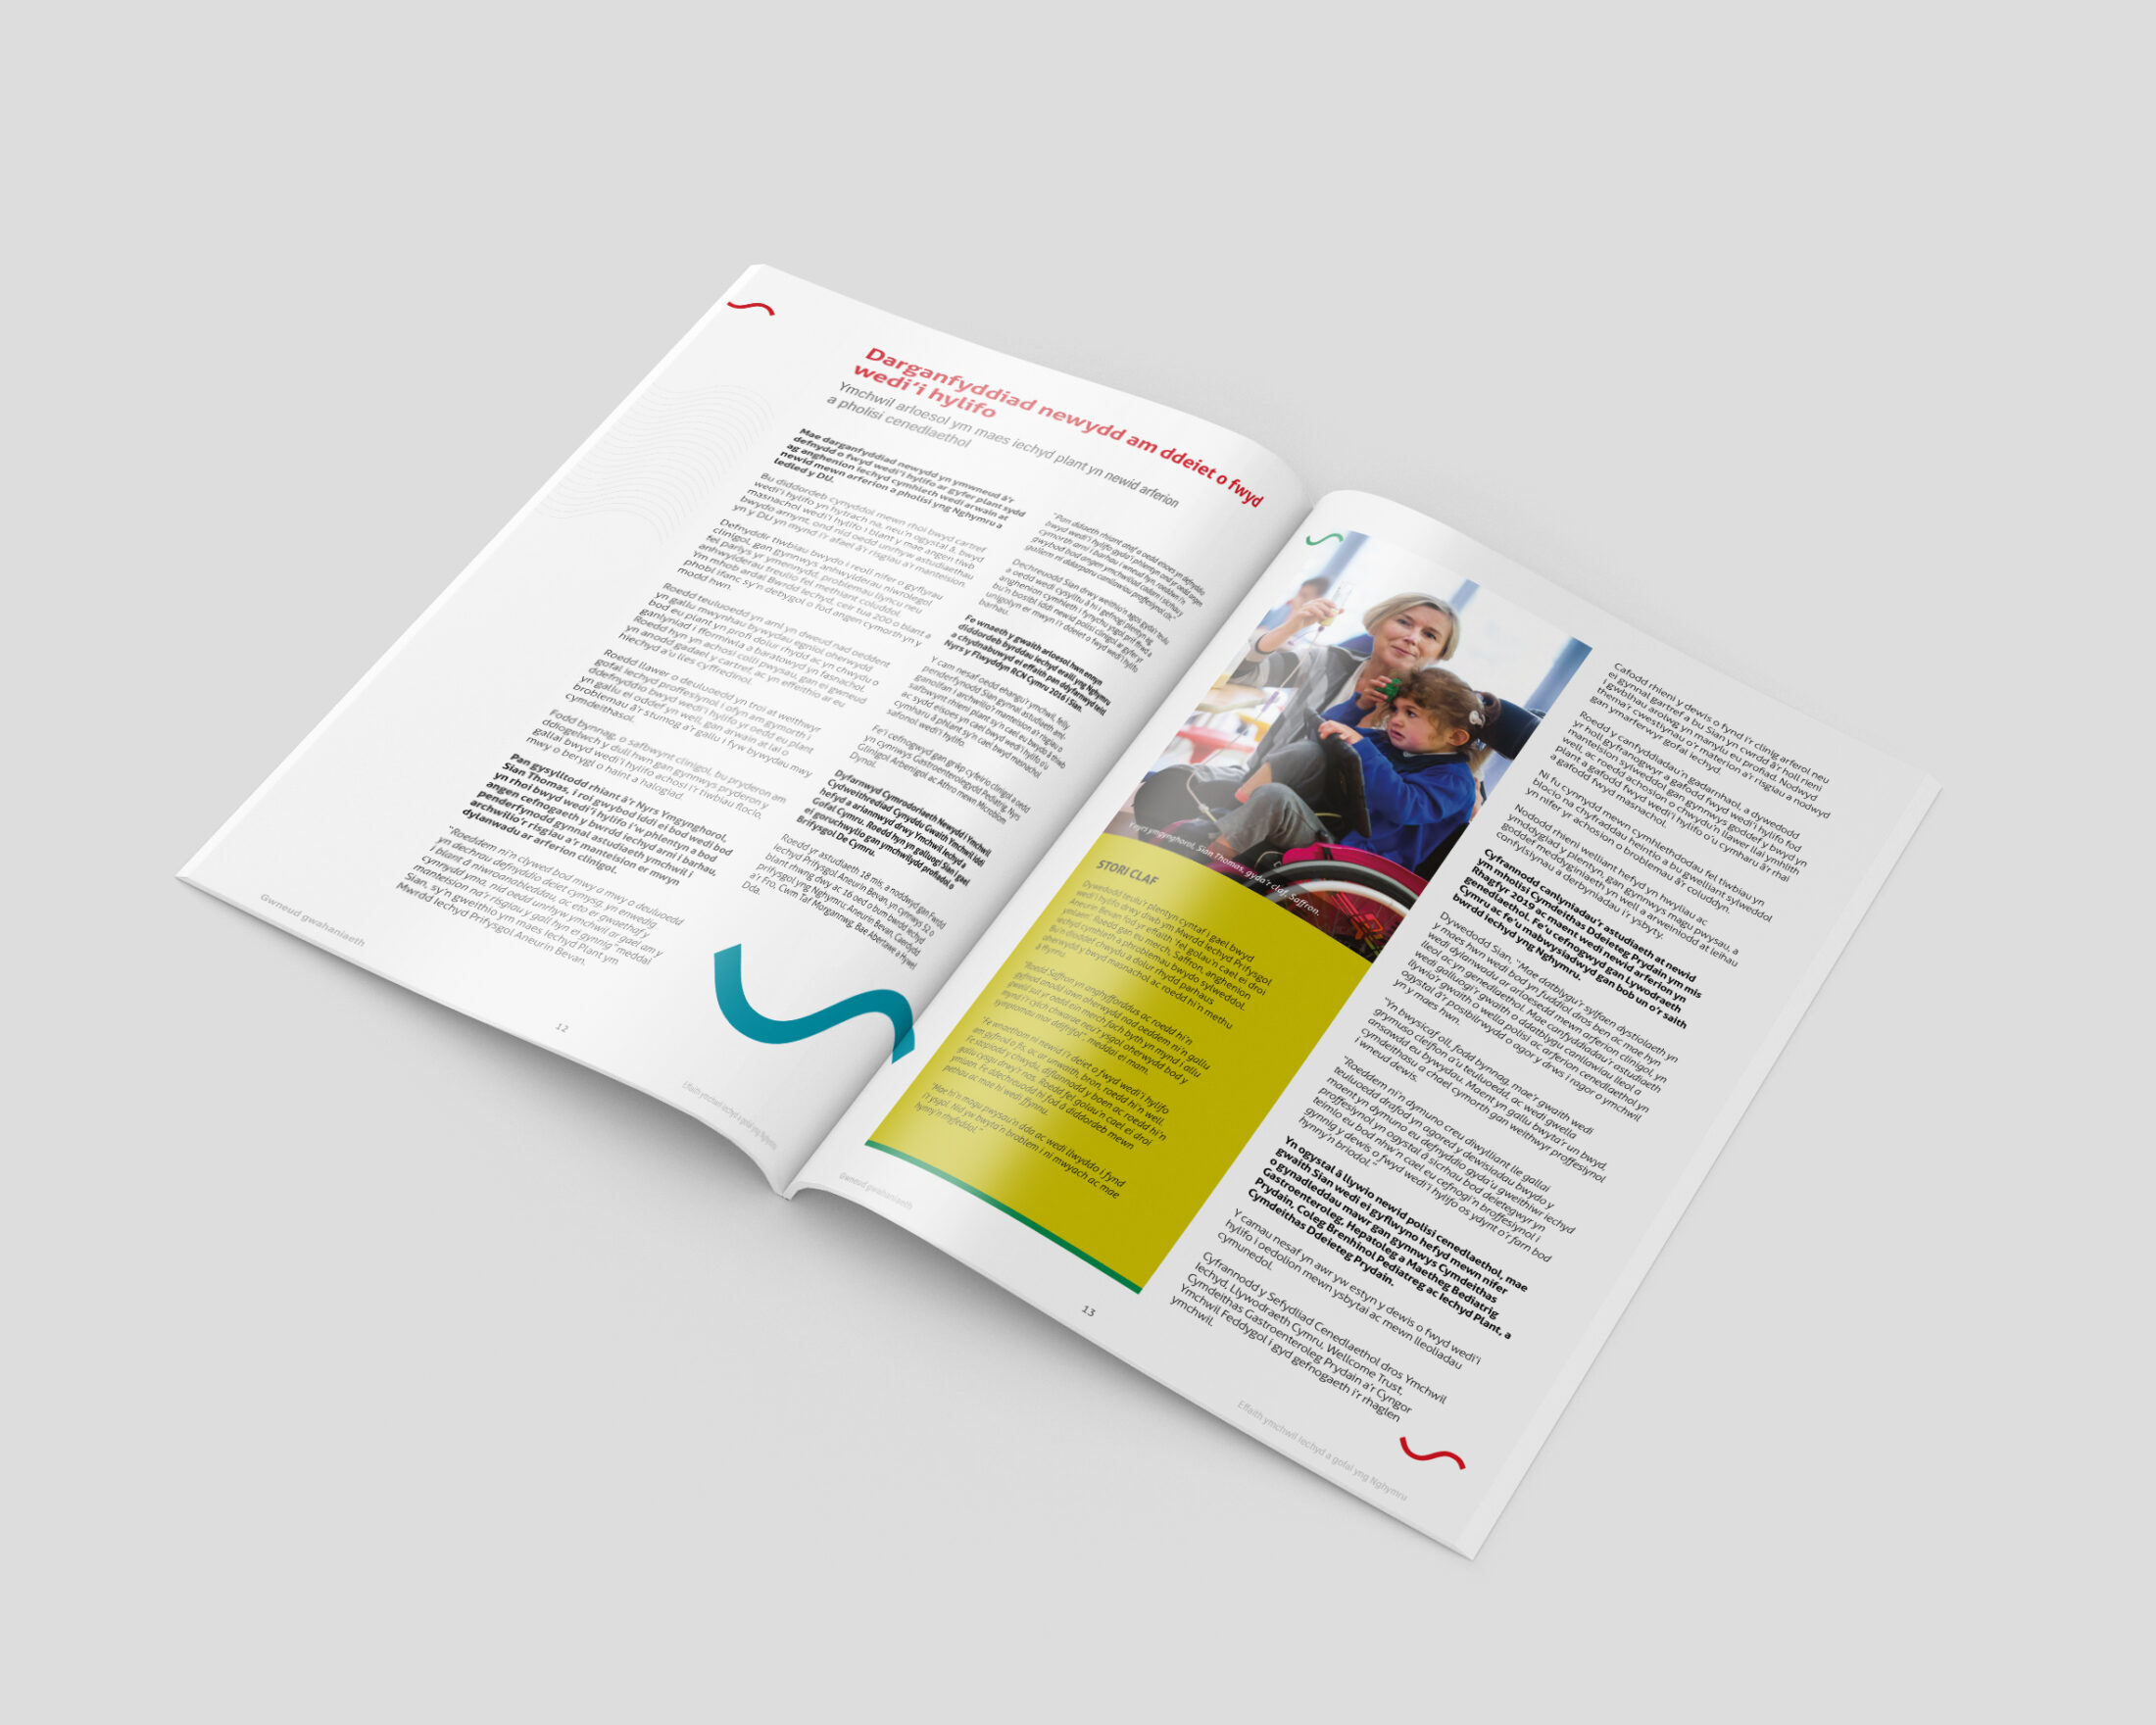 Open report spread featuring an article with the header 'Barriers to inclusion in education for young people with Type 1 diabetes'. The left page has a yellow sidebar with a case study, while the right page includes an inset photo of a child in a wheelchair with an adult in a classroom setting.